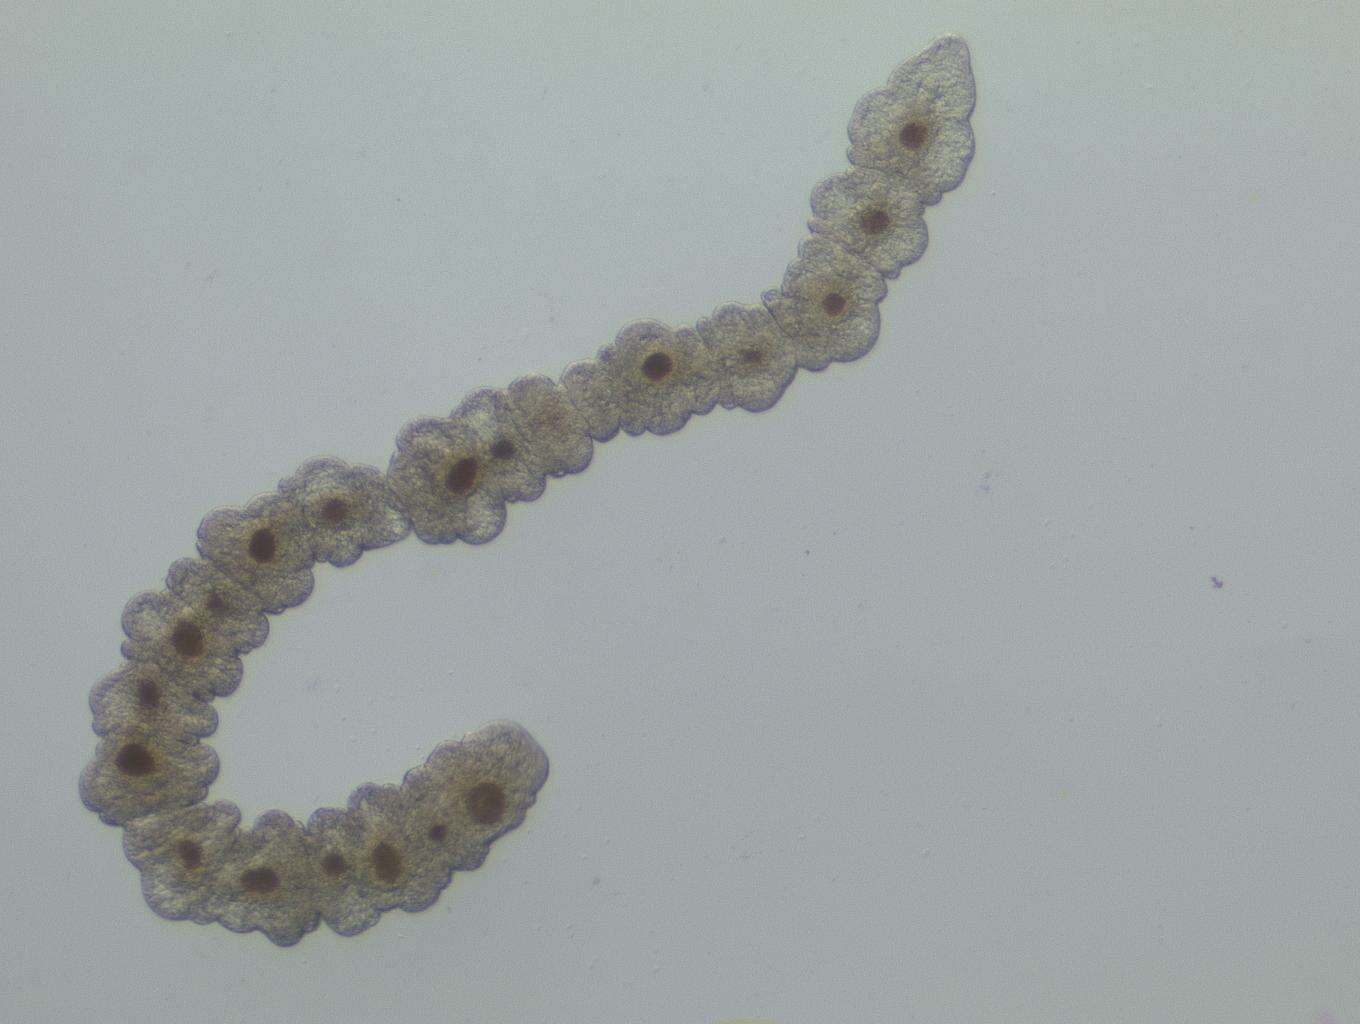 Image of flatworms